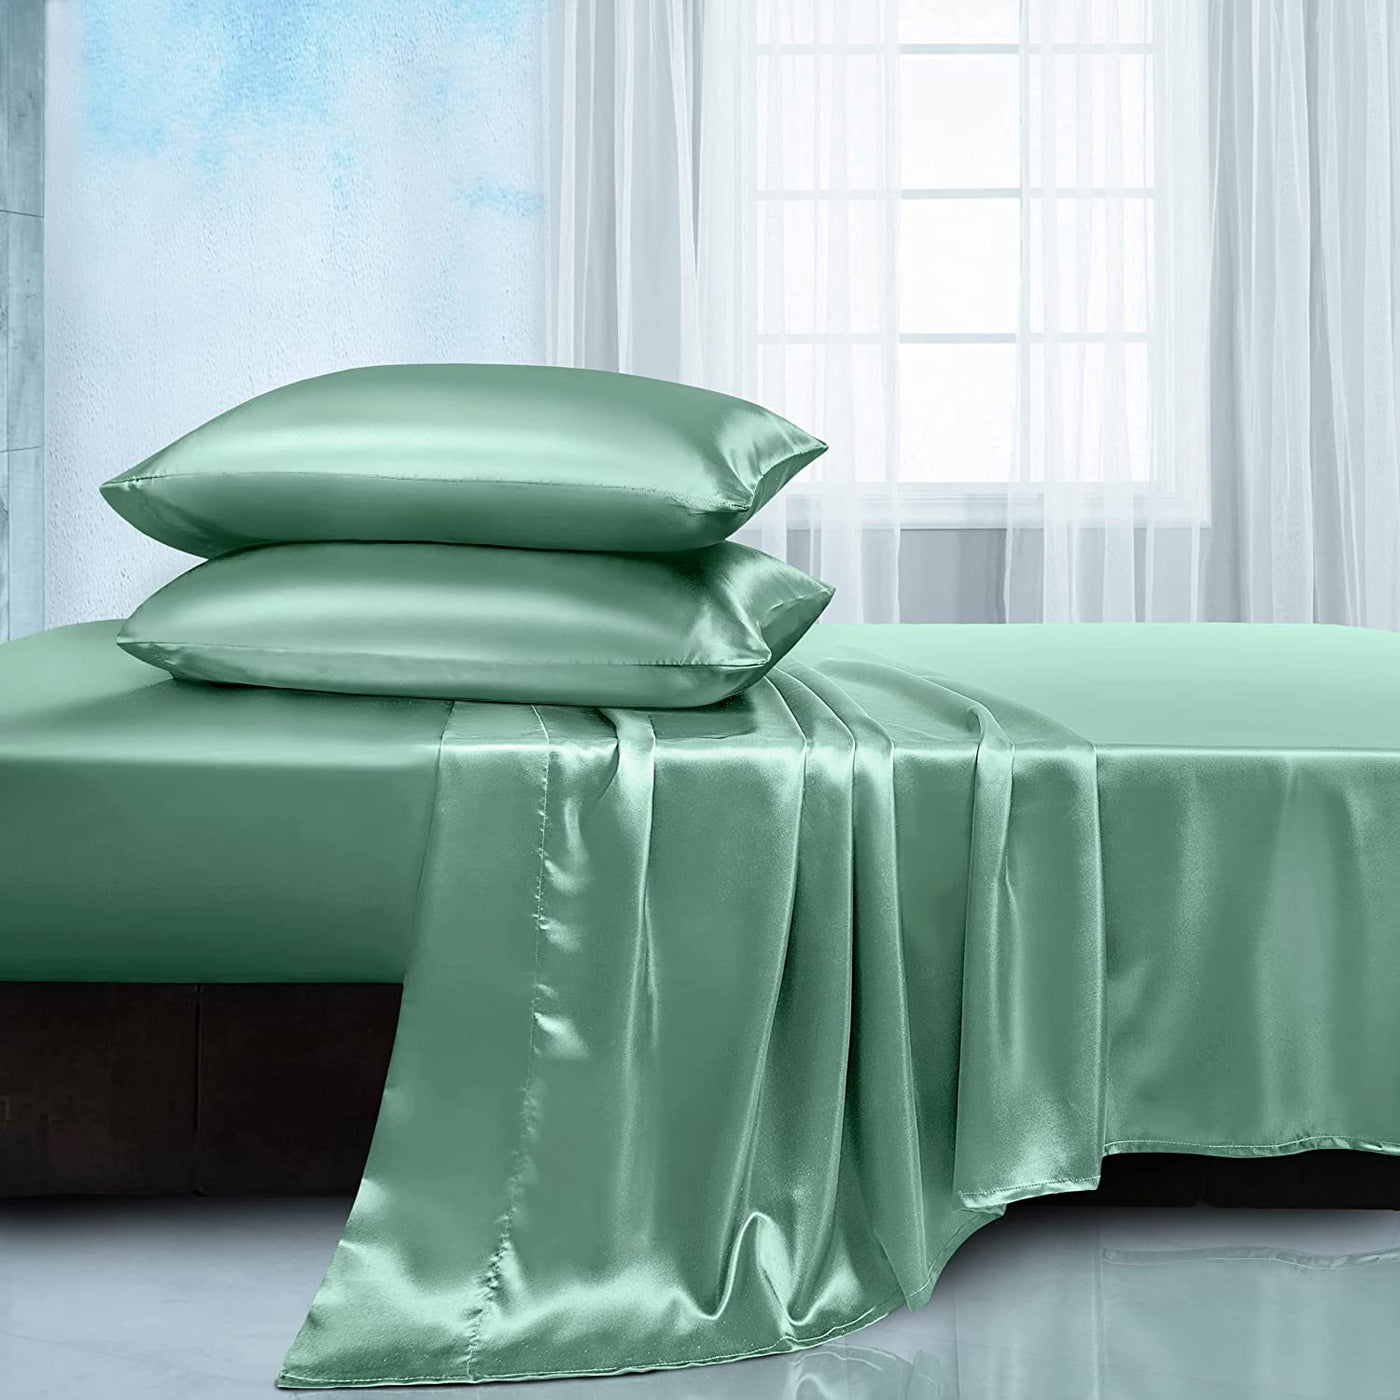 Soft Silky Satin Sheets Set, Luxury Bedding Sheet Set(1 Satin Fitted Sheet, 1 Satin Flat Sheet, 2 Satin Pillow Cases(Twin/1Pillow Case)